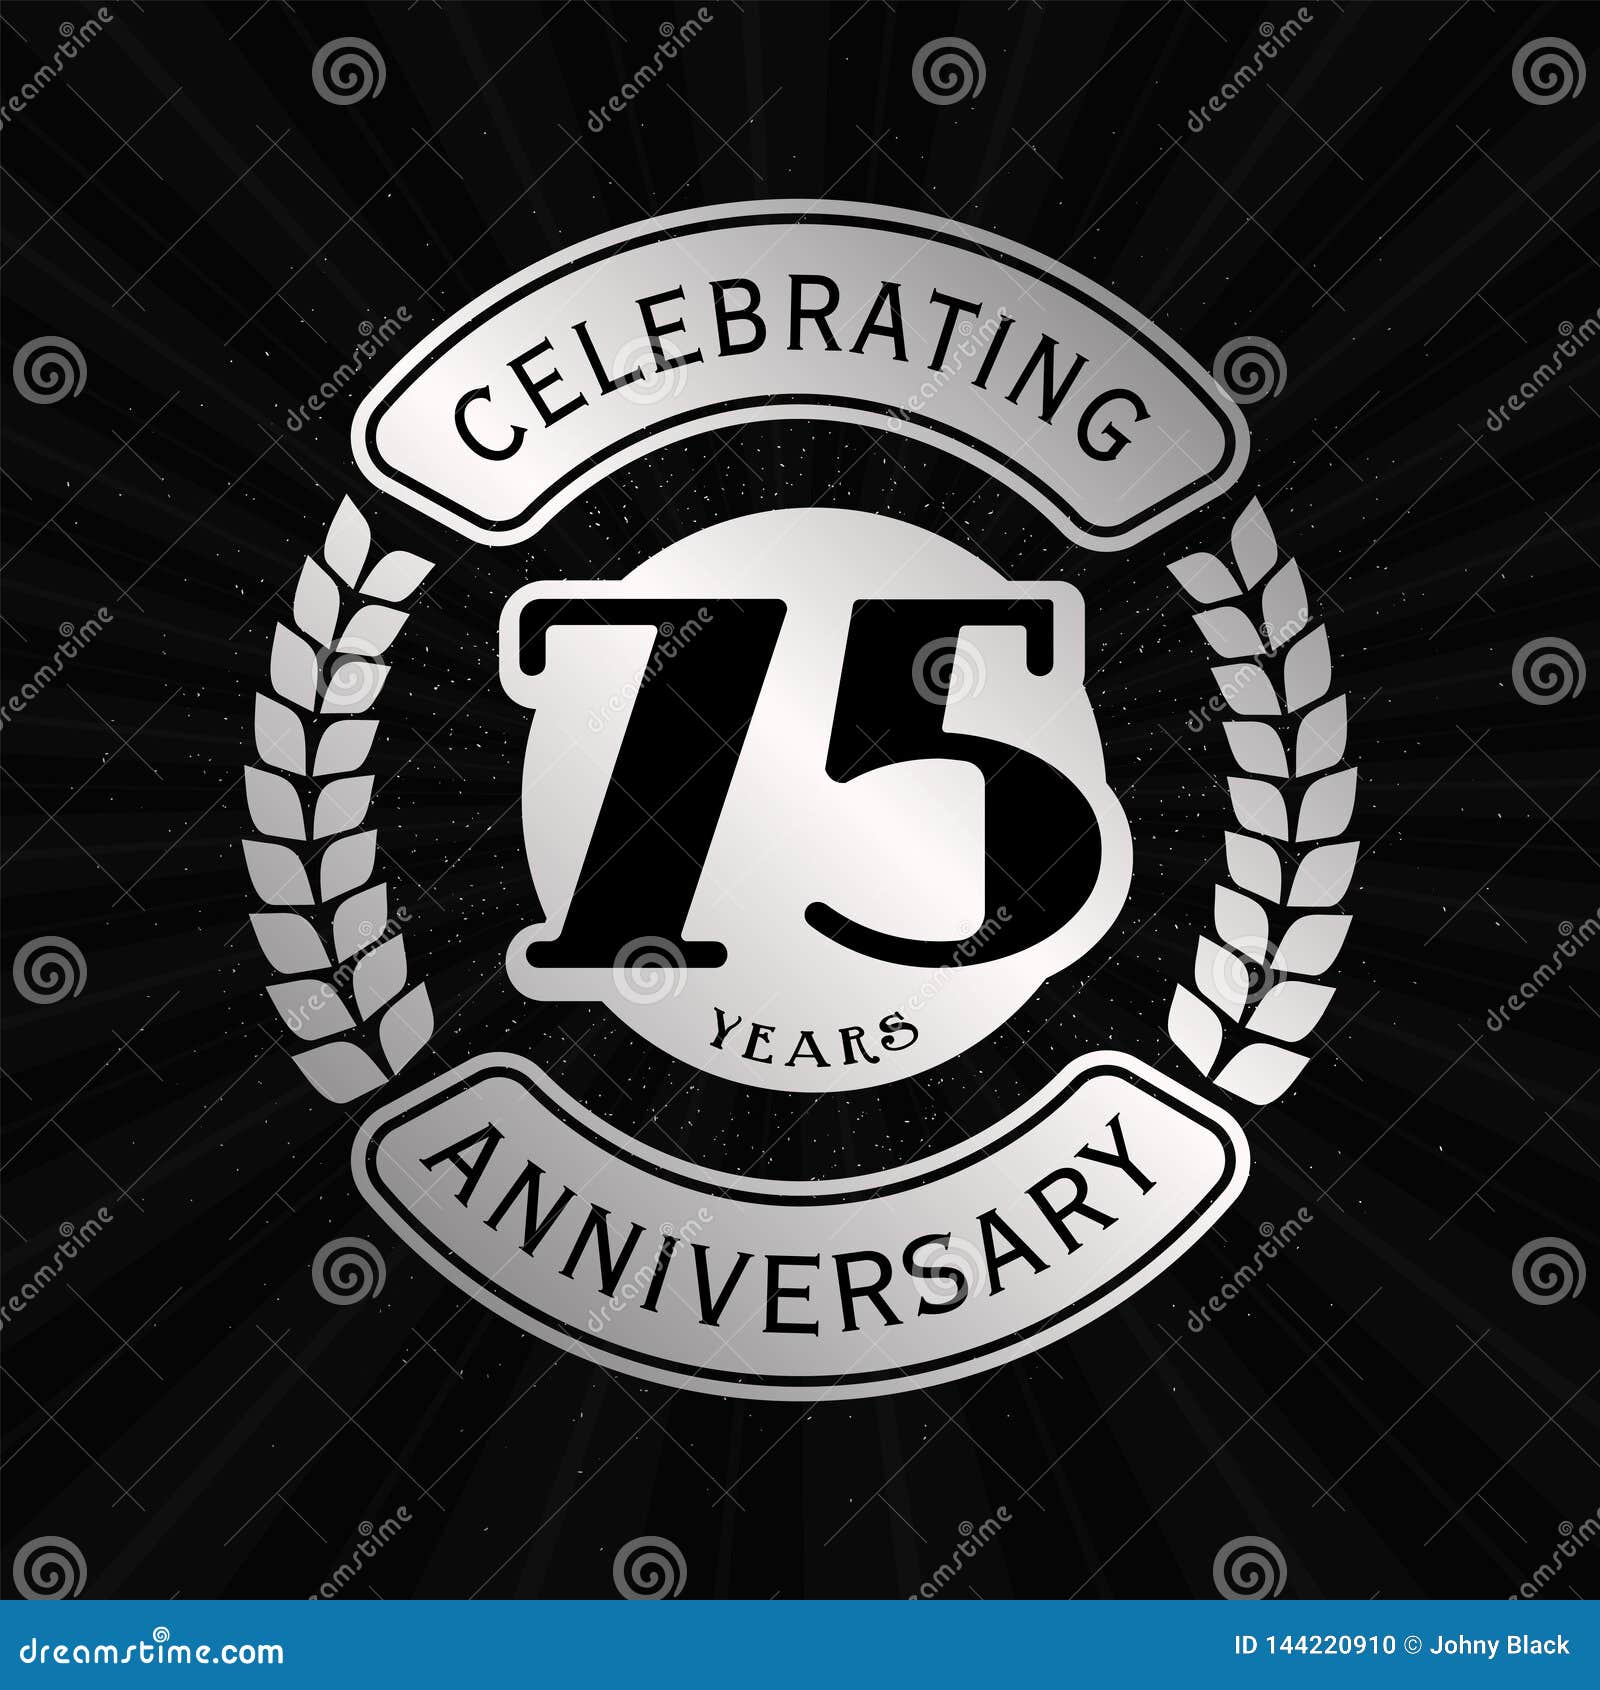 75 Years Celebrating Anniversary Design Template. 75th Logo. Vector and ...